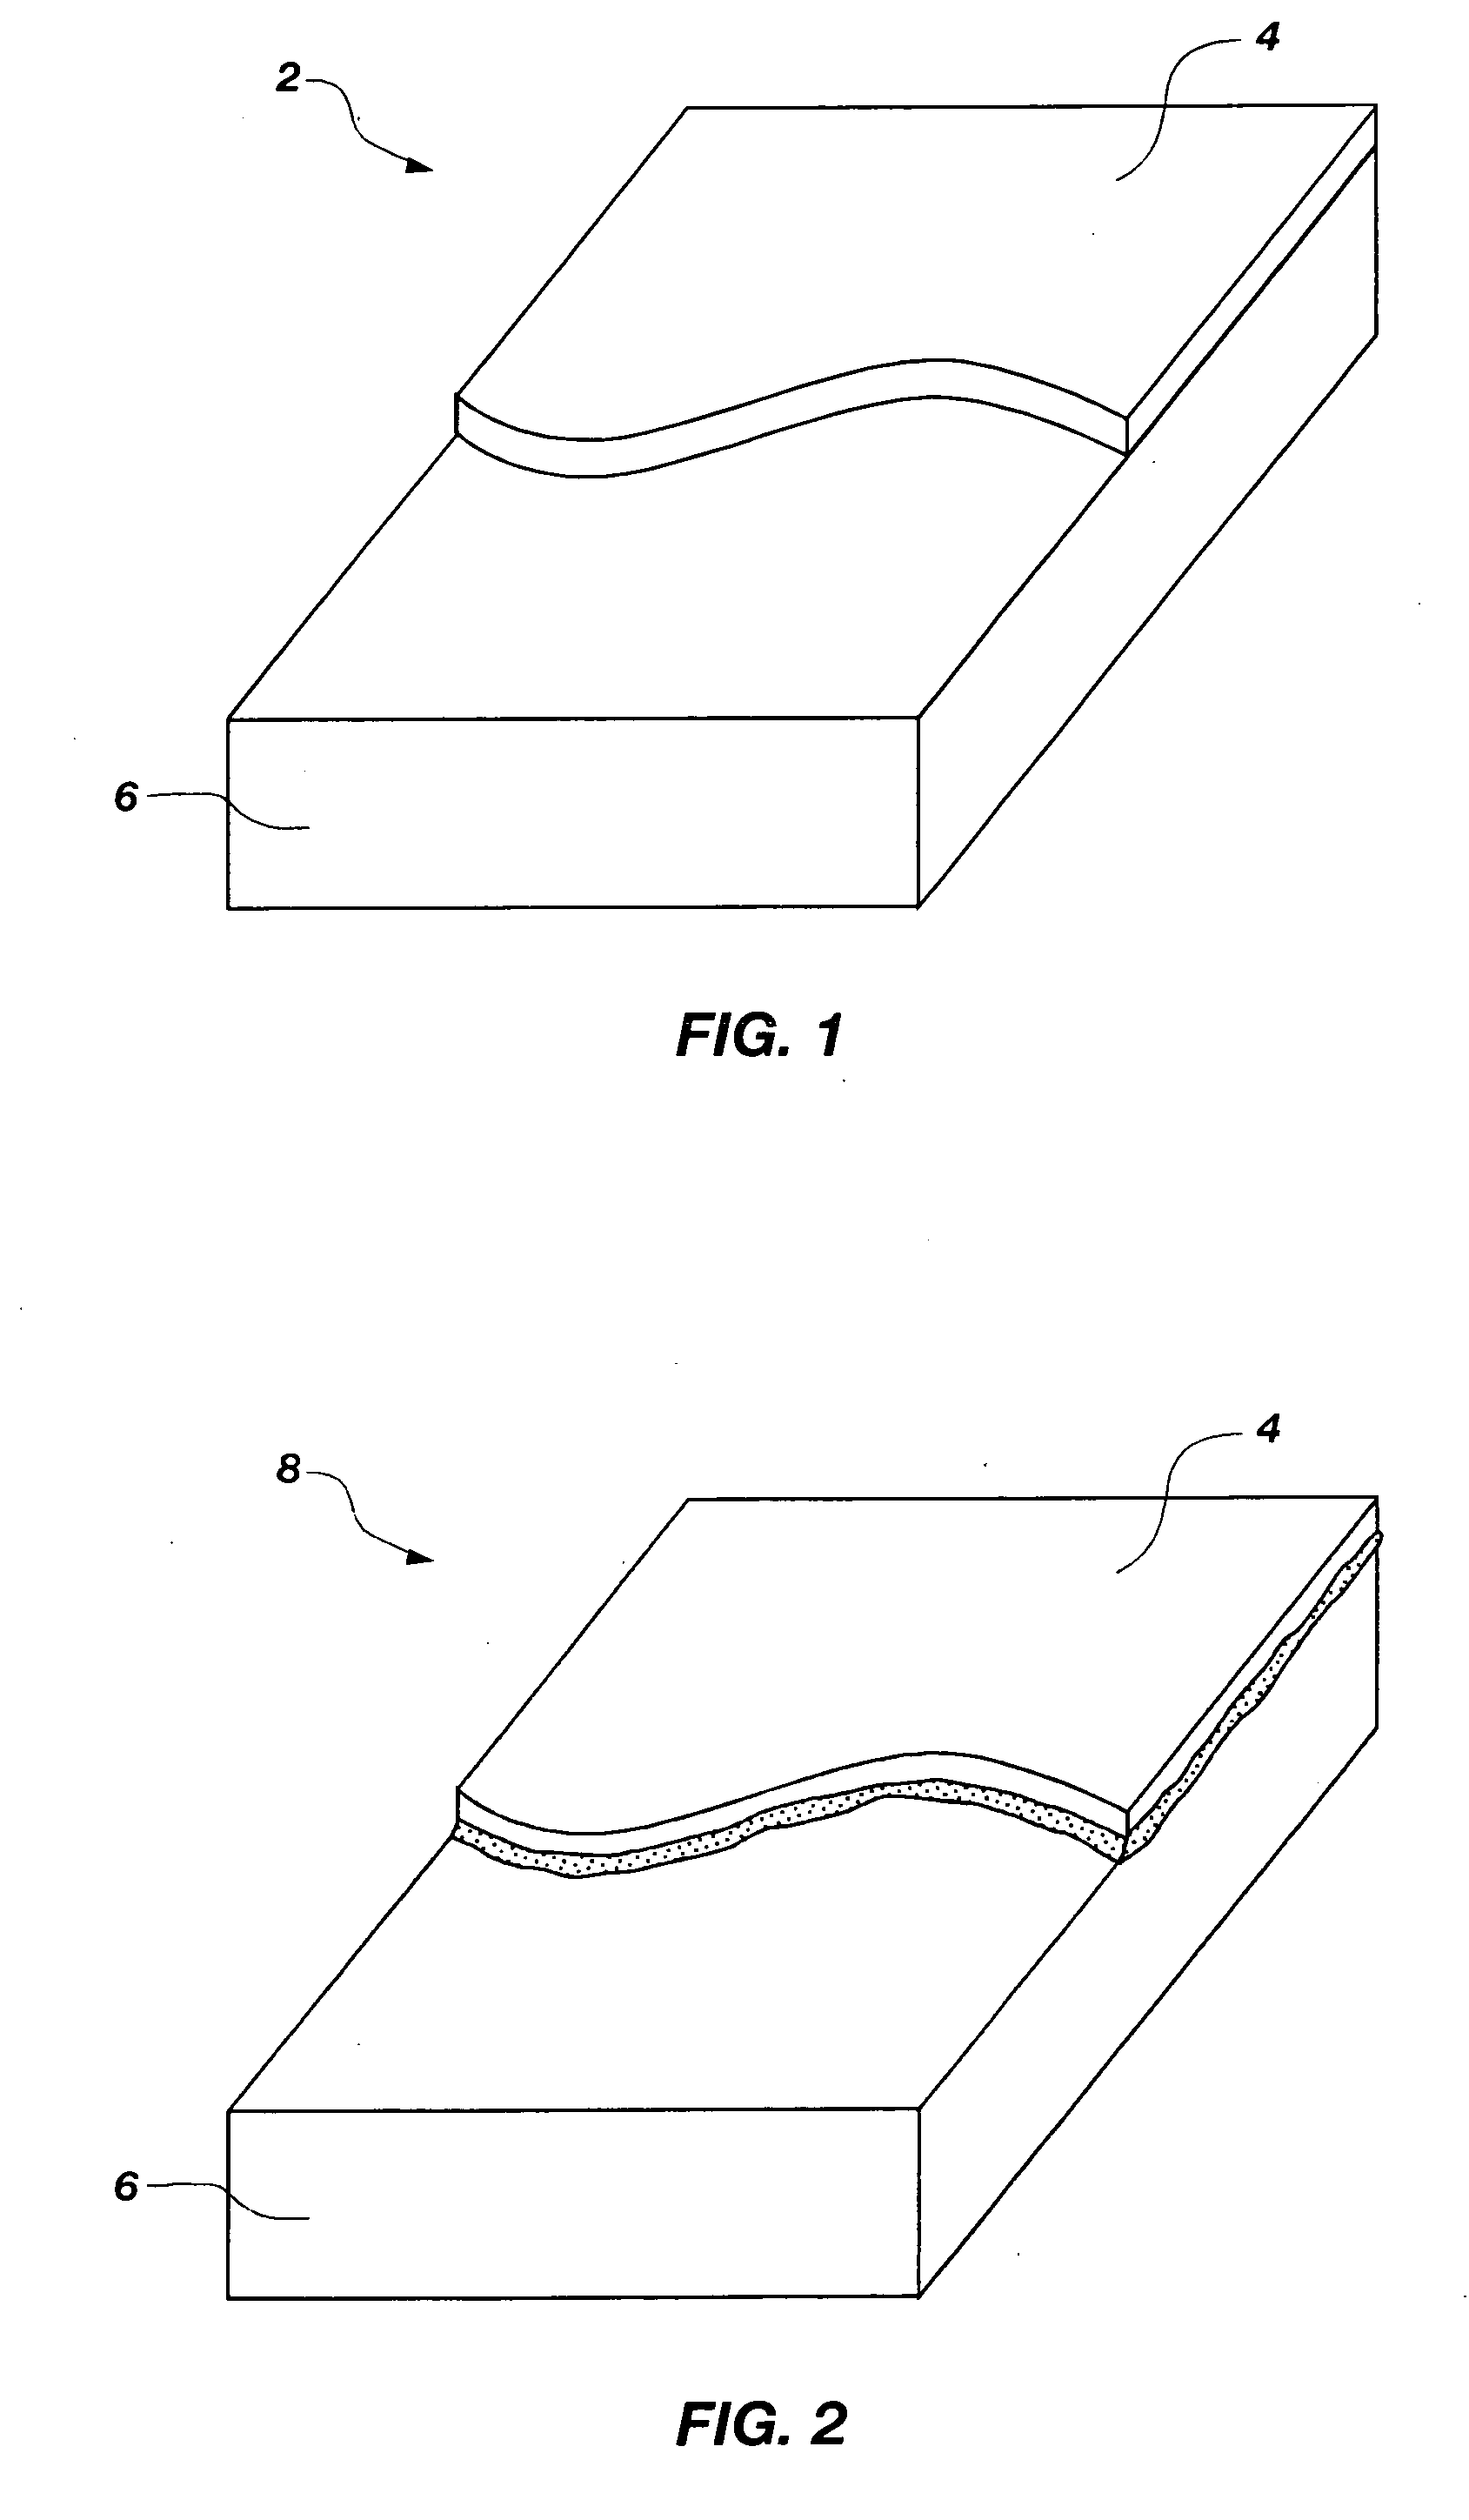 Inert processing of oxide ceramic matrix composites and oxidation sensitive ceramic materials and intermediate structures and articles incorporating same